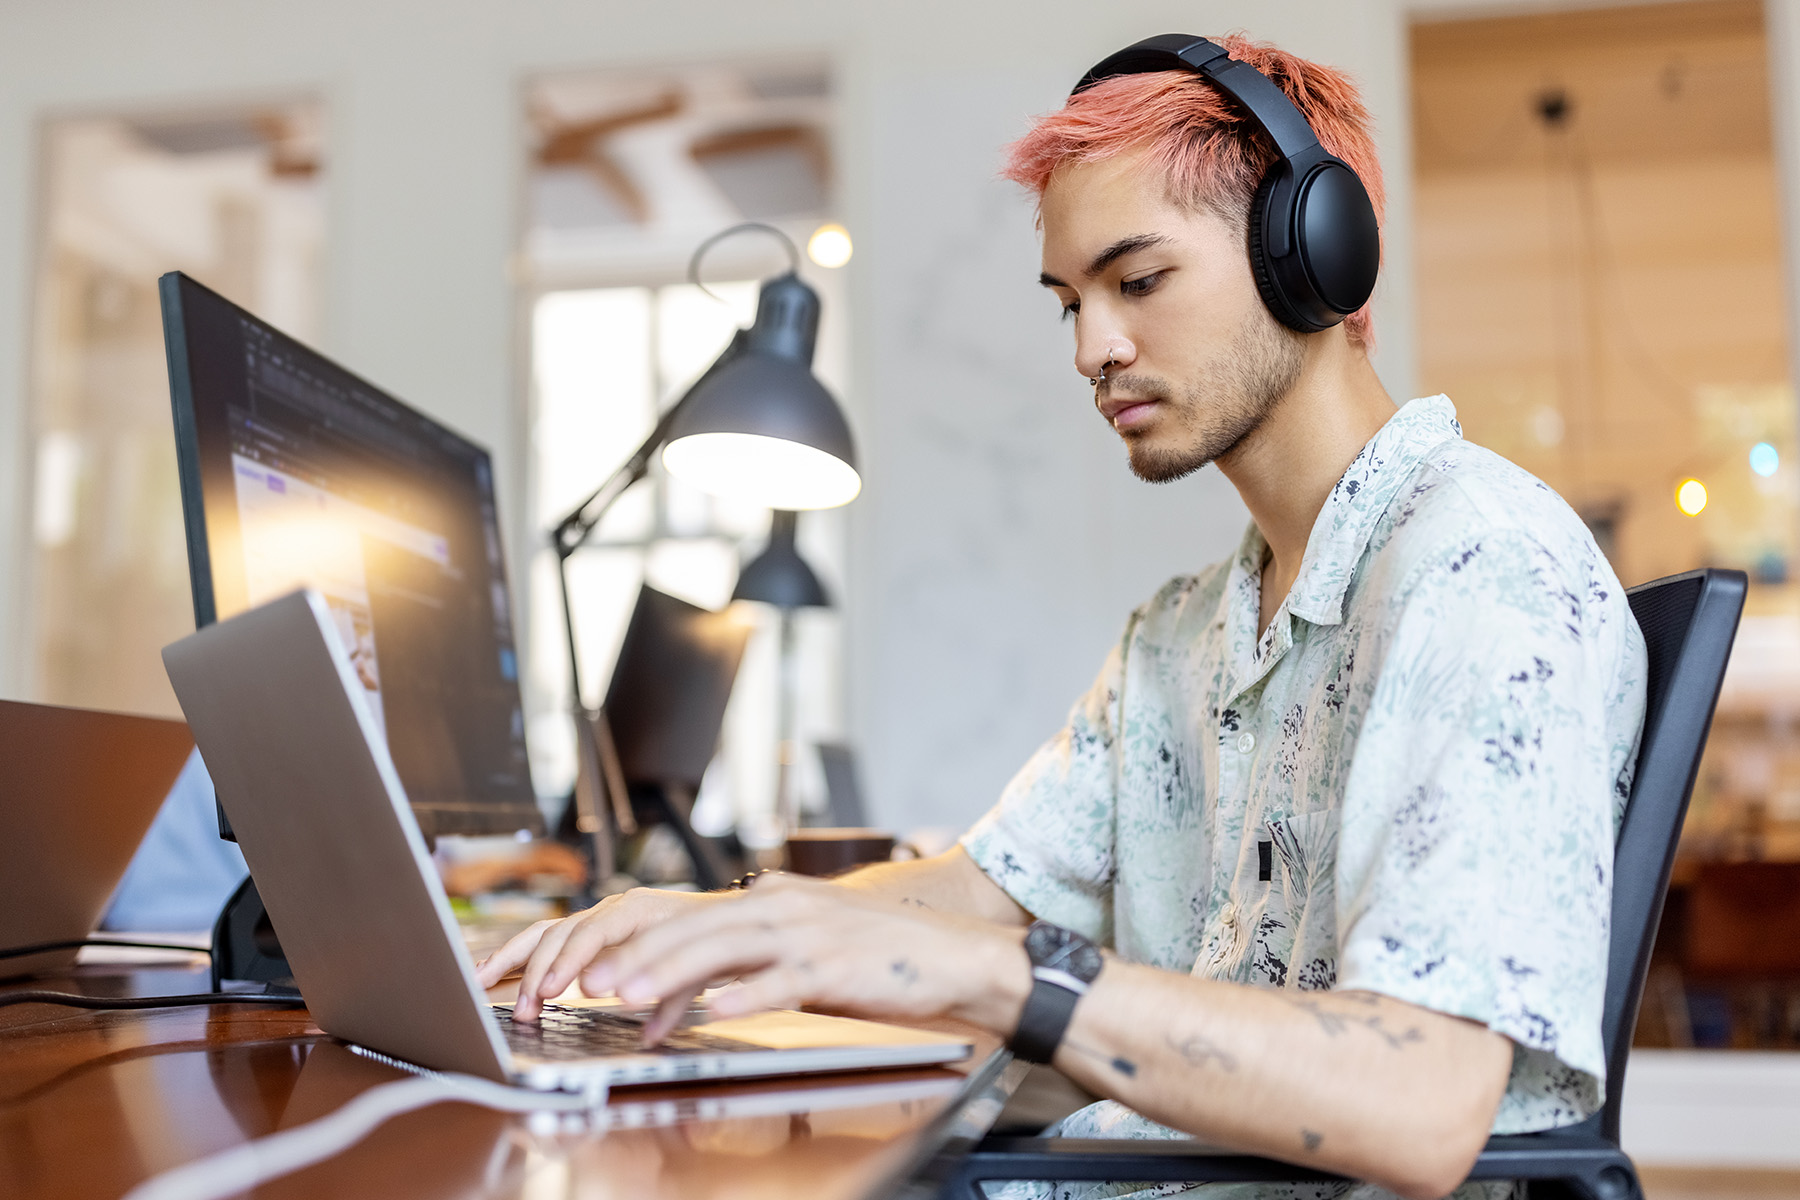 Man with pink hair and headphones working on laptop at an office.